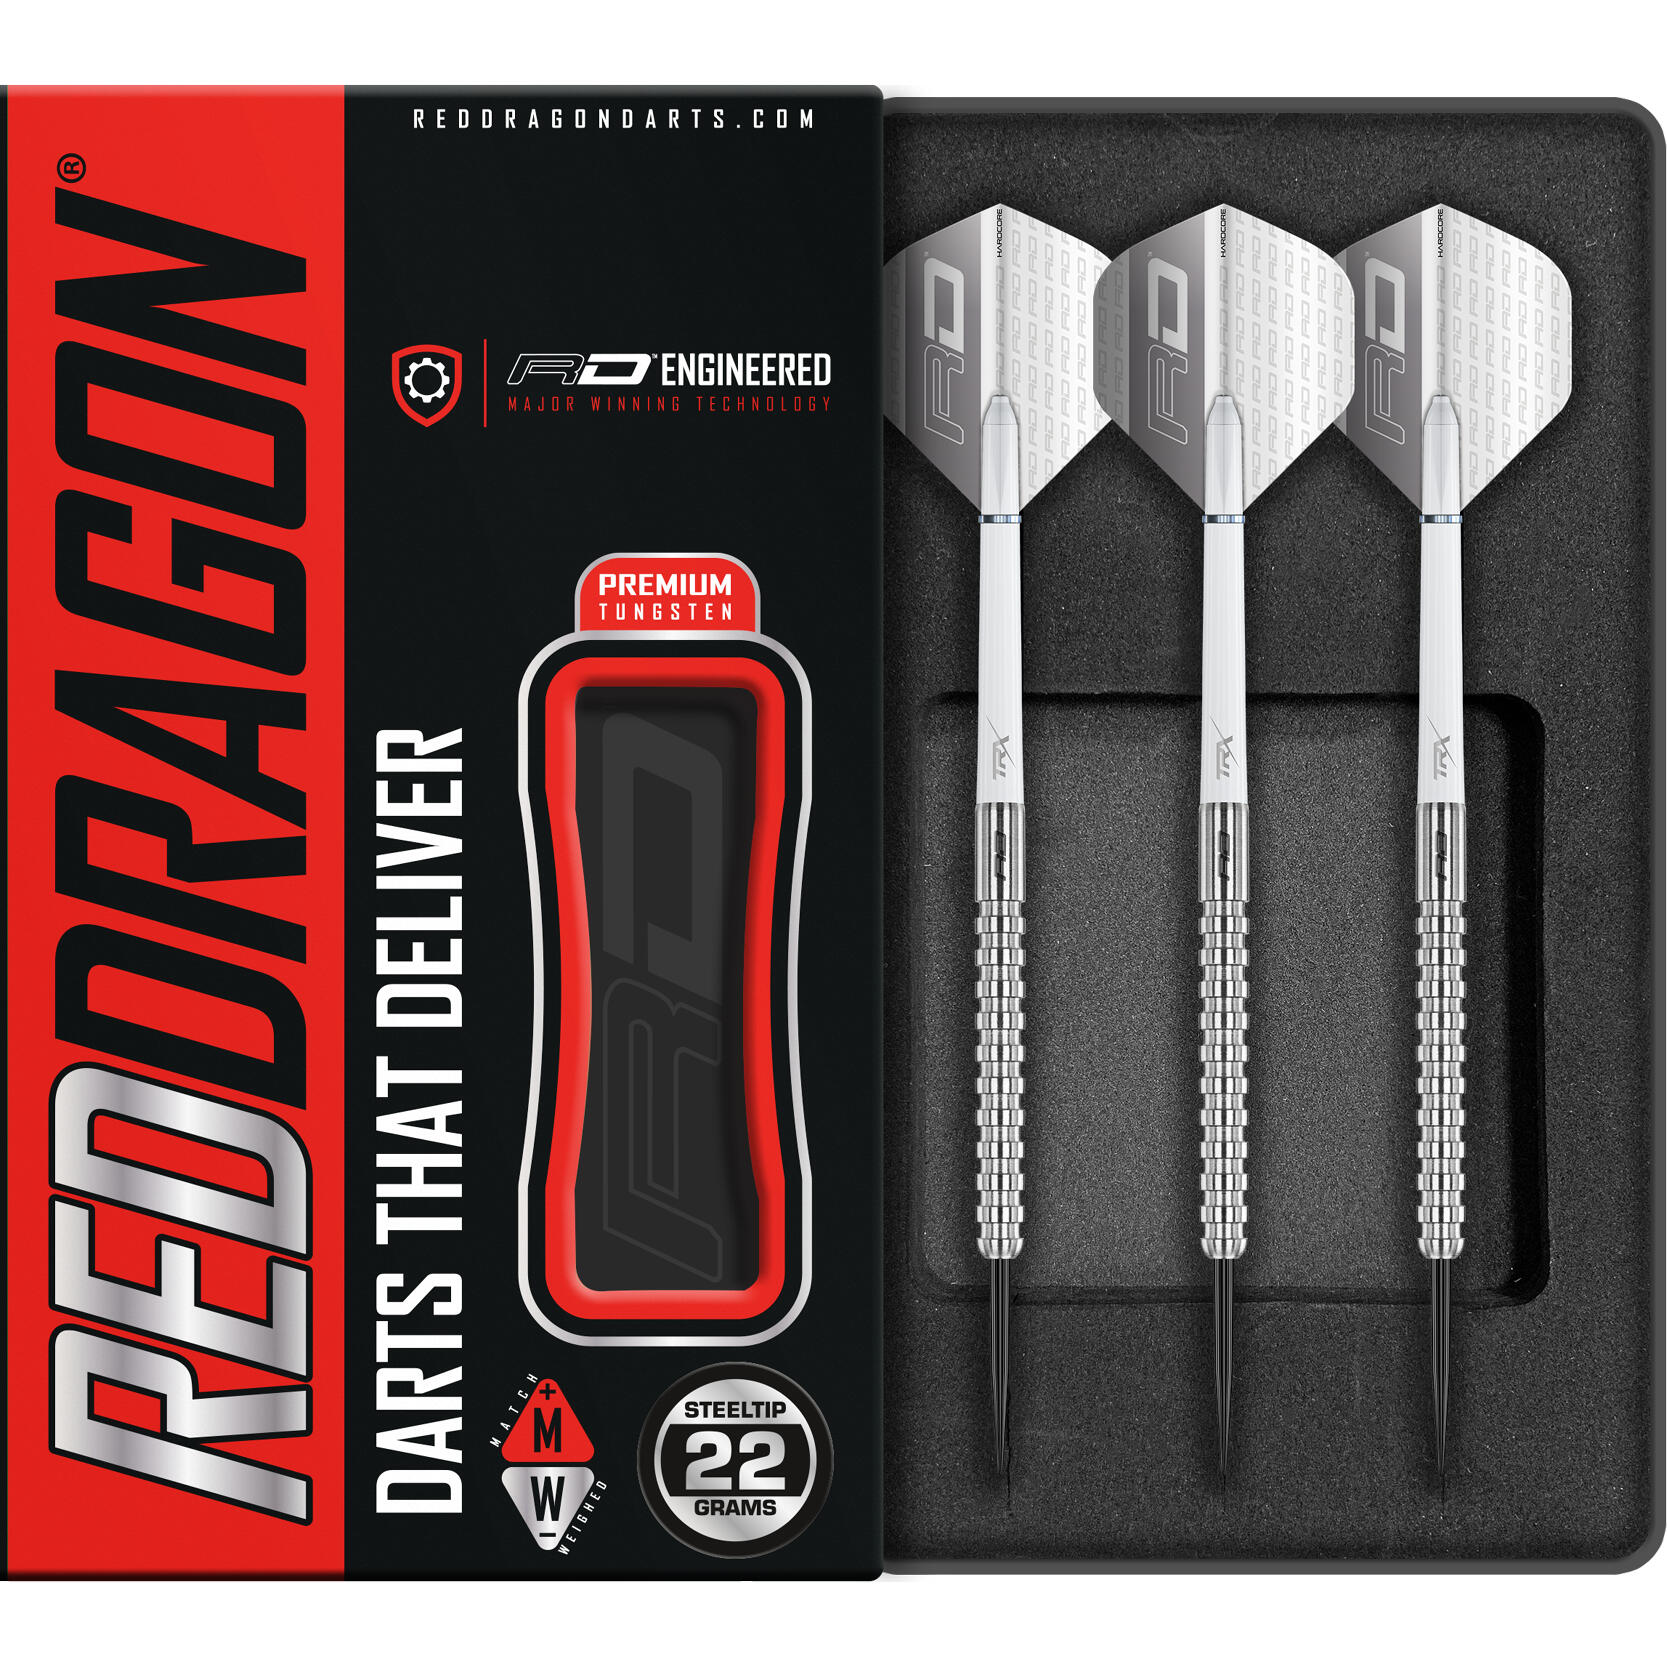 RED DRAGON DARTS Javelin: 22g - Tungsten Darts Set with Flights and Stems